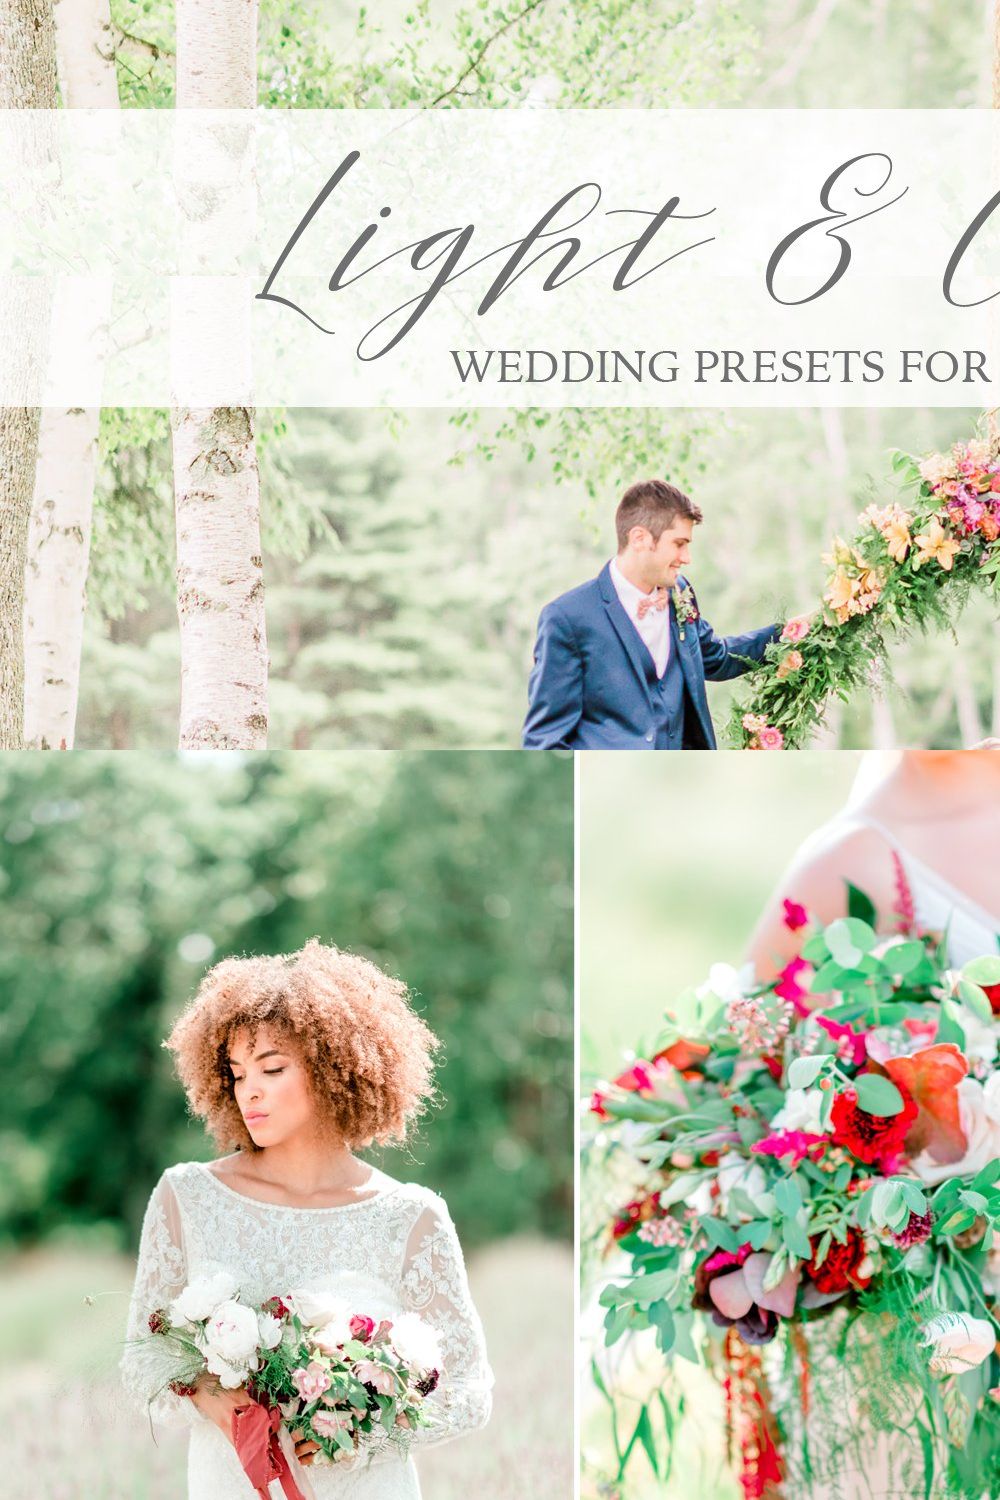 Light & Colorful Wedding Presets pinterest preview image.